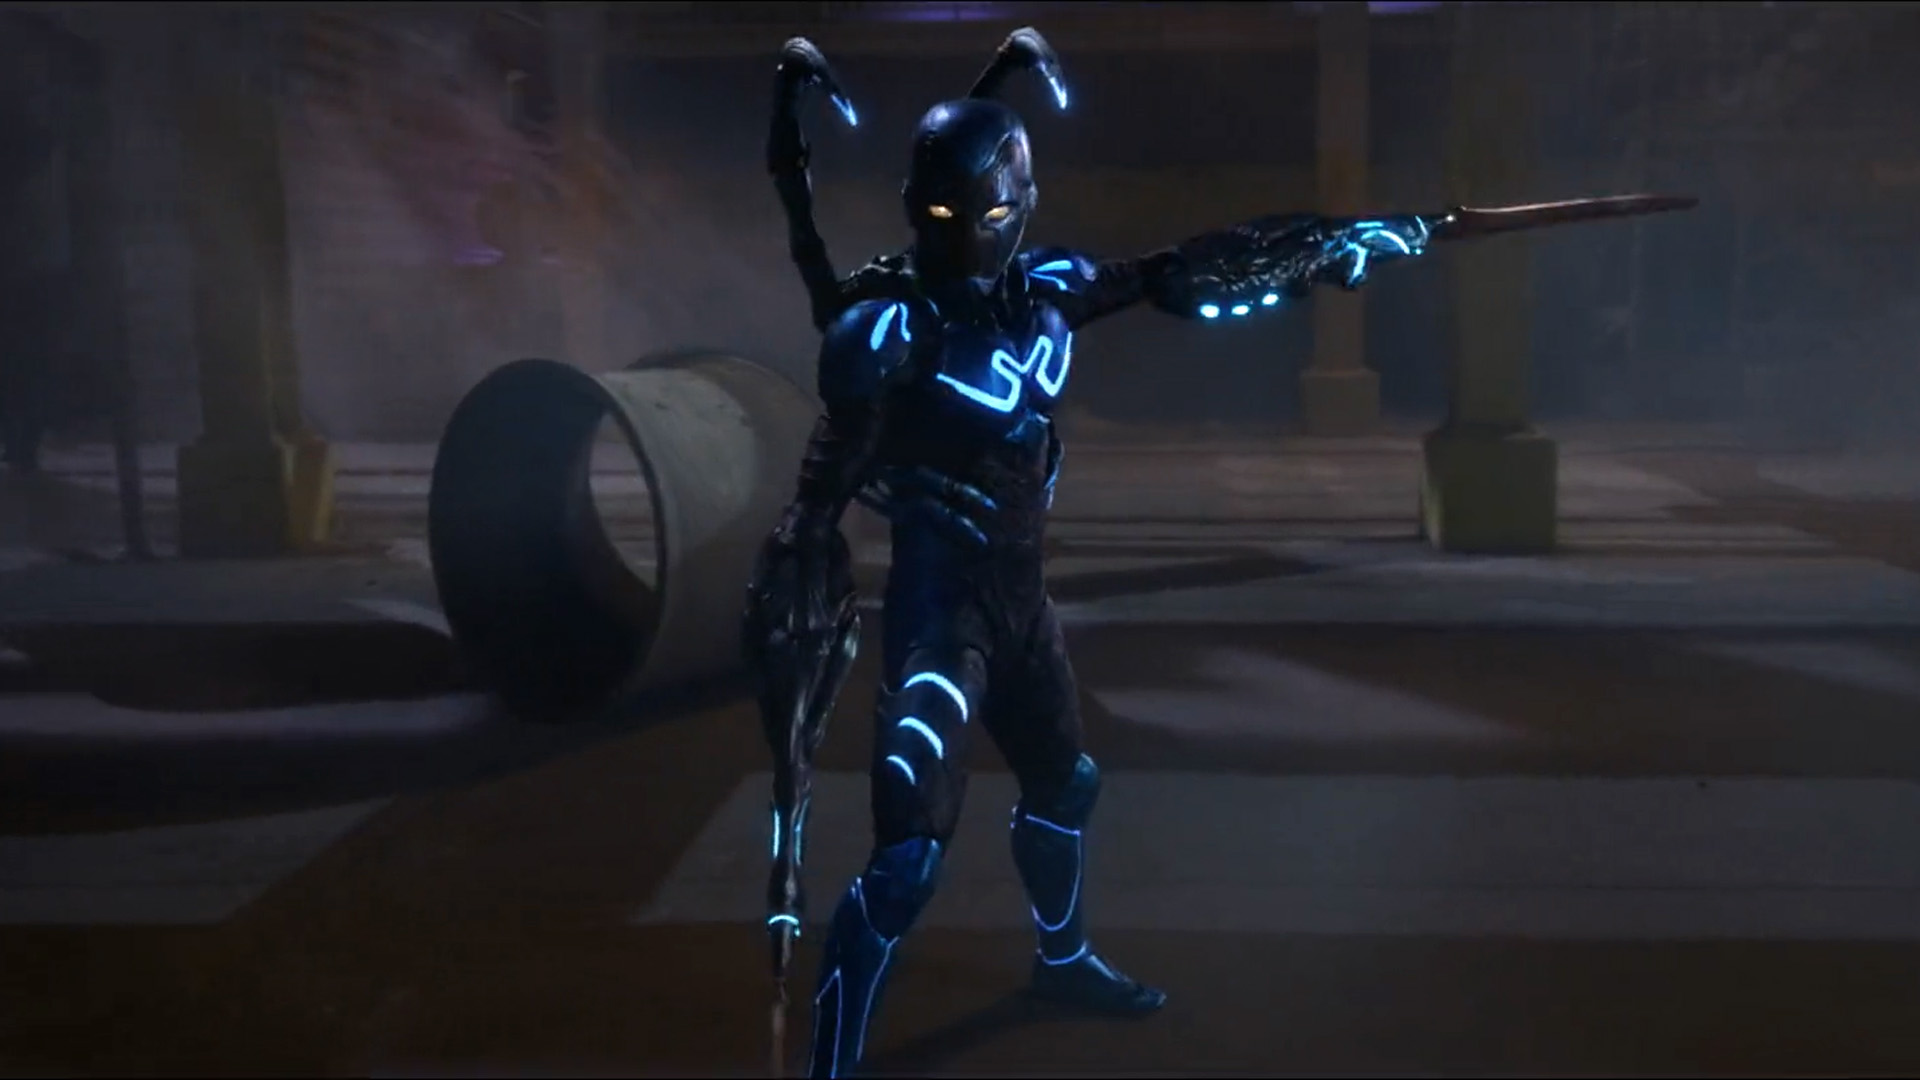 Blue Beetle looks like it could be the best DC movie in years